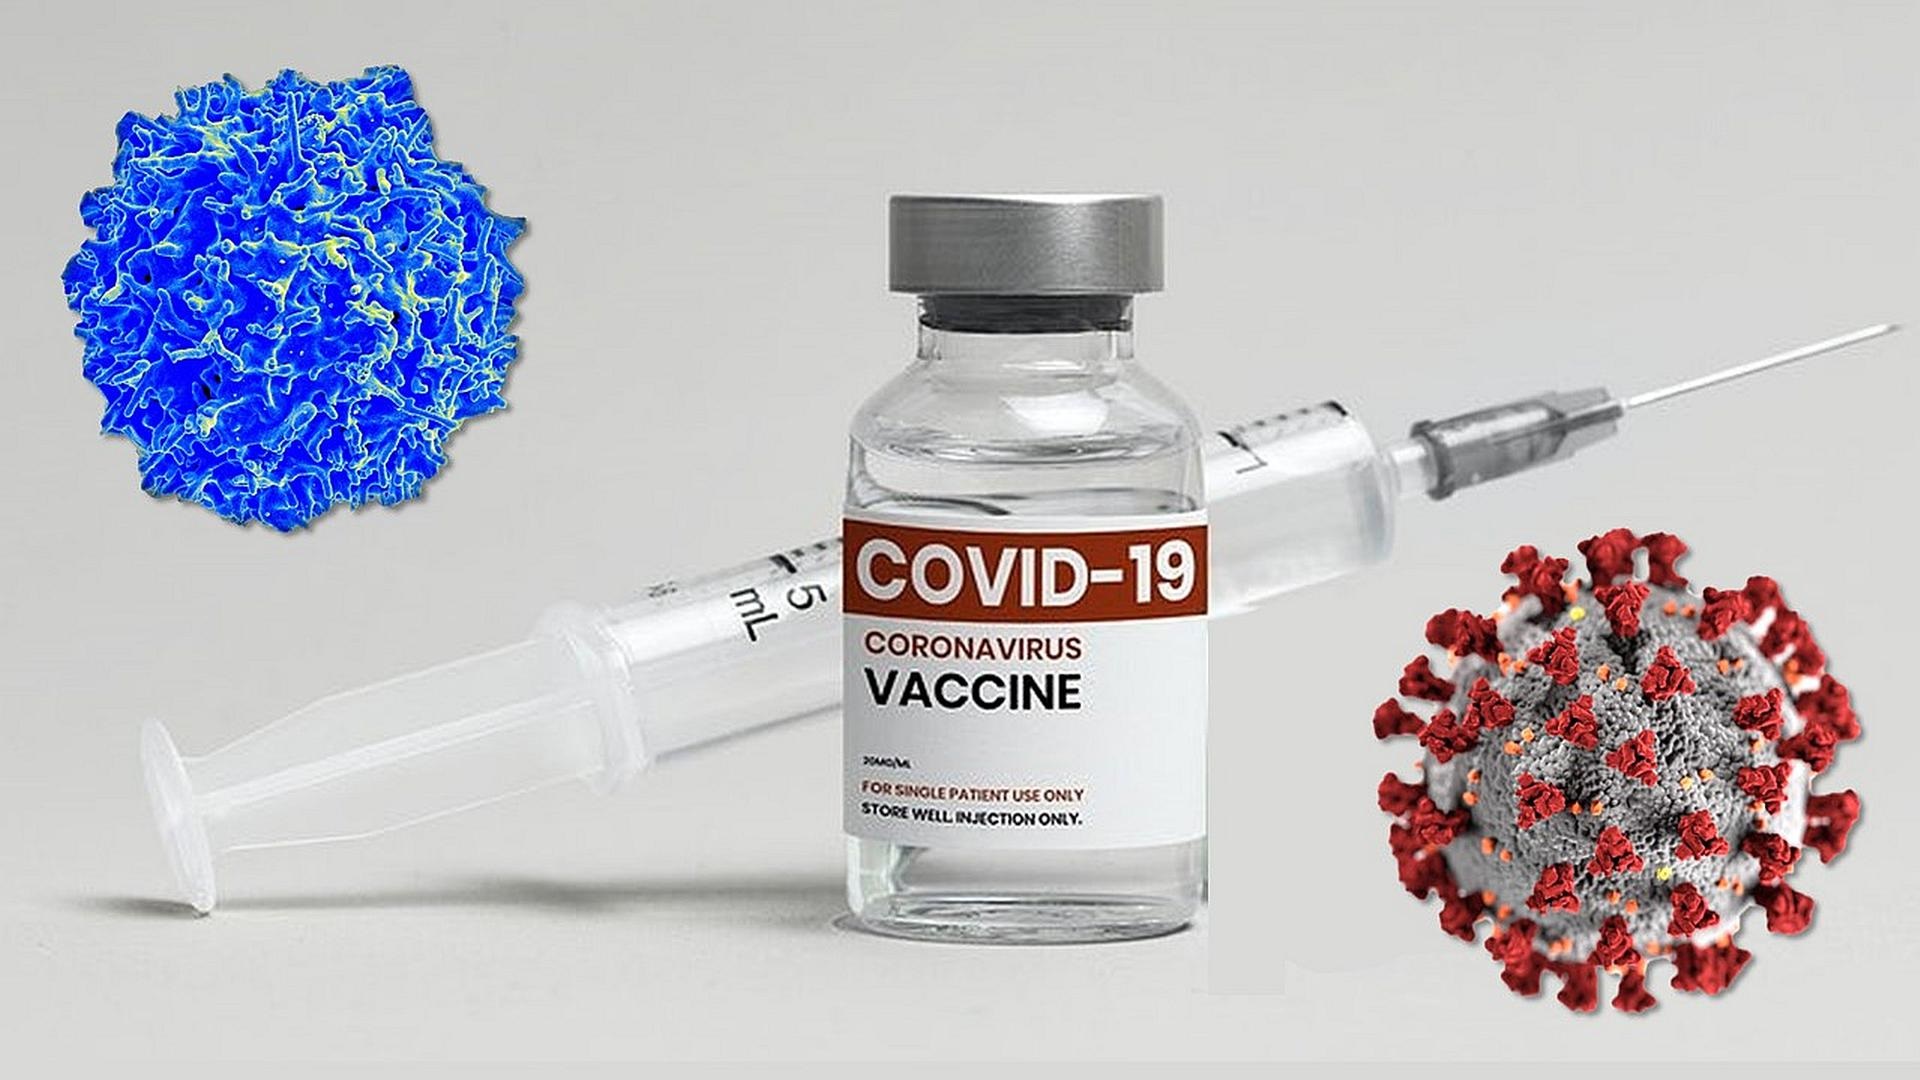 This corona vaccine of India will be effective against any variant including Delta and Omicron